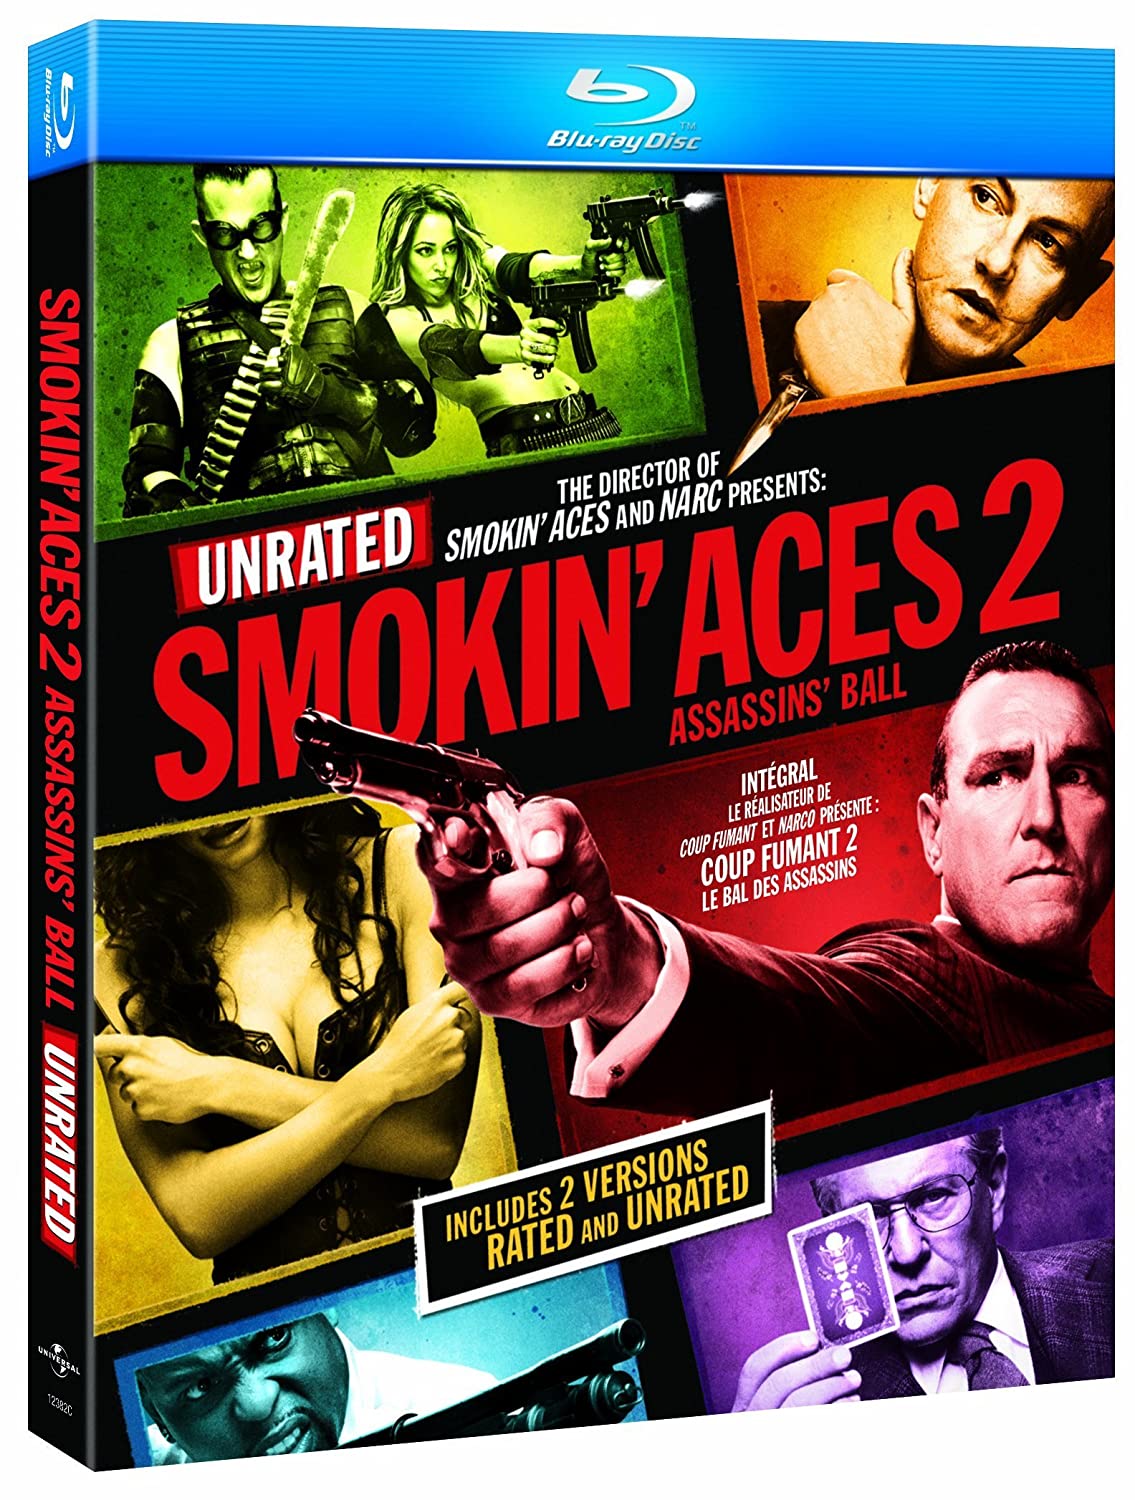 Smokin' Aces 2: Assassins' Ball (Unrated) Blu-ray